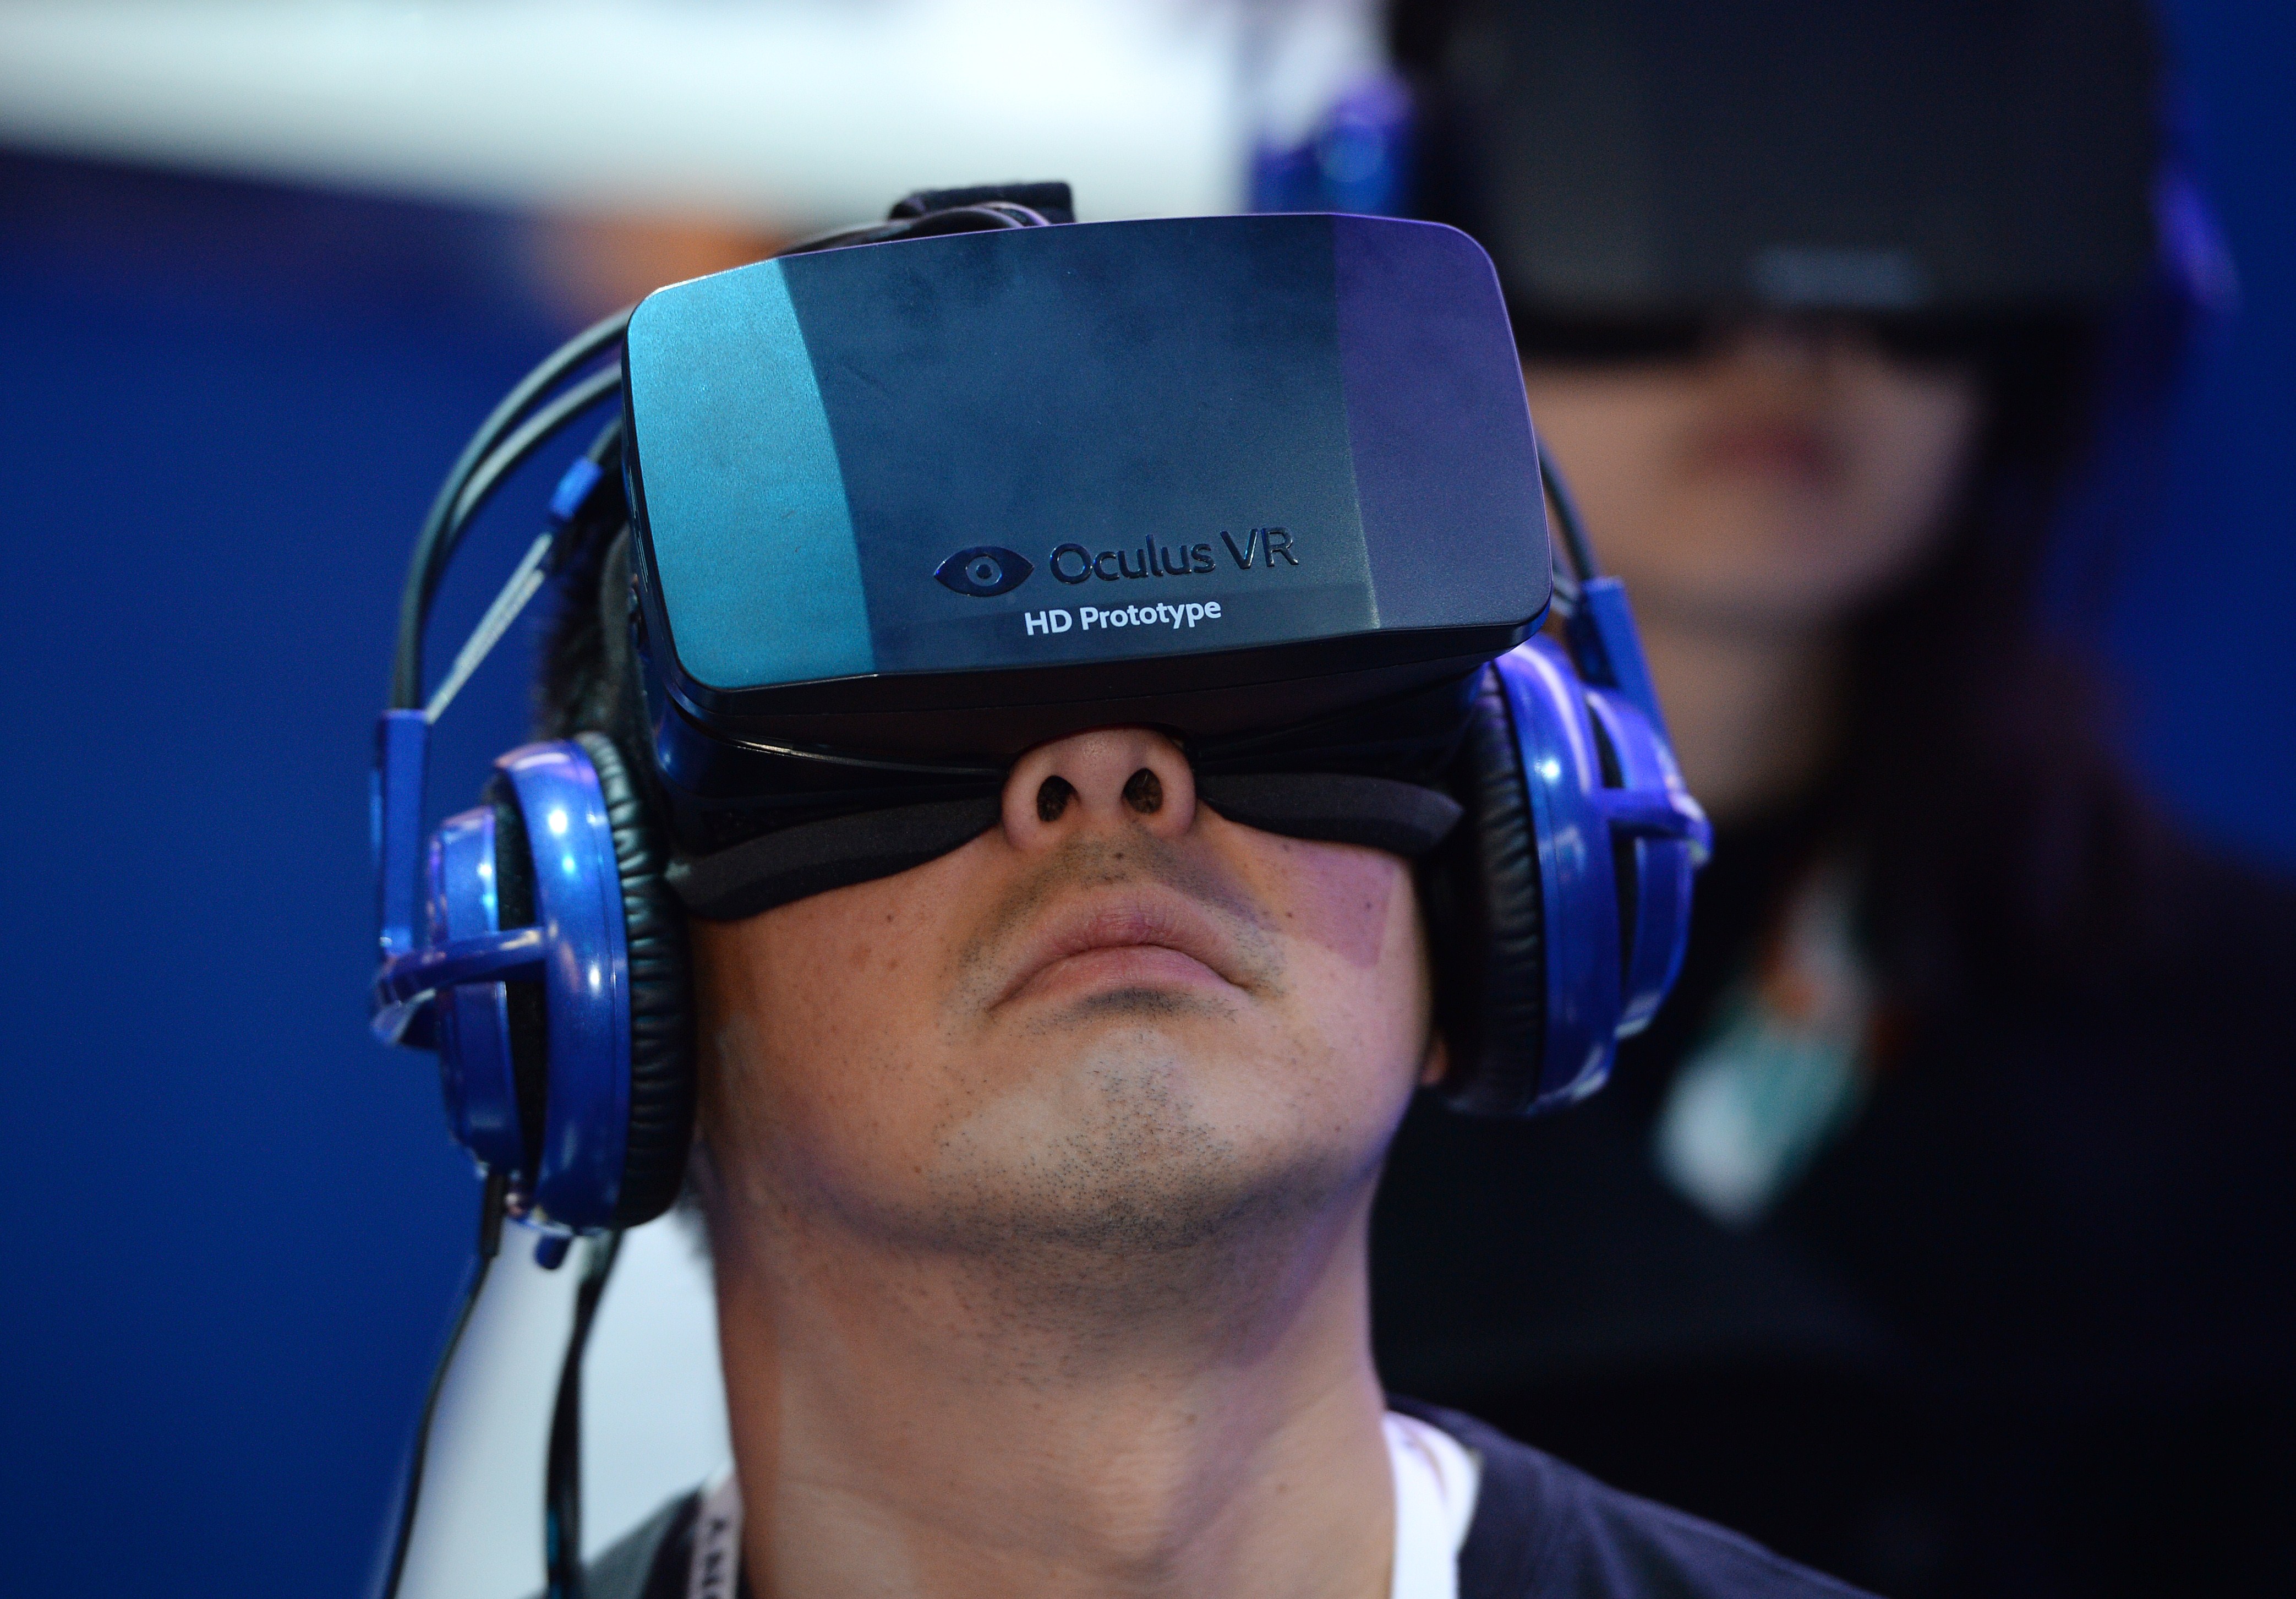 An attendee wears an Oculus Rift HD virtual reality head-mounted display at the 2014 International CES, January 9, 2014 in Las Vegas, Nevada. (Robyn Beck&mdash;AFP/Getty Images)